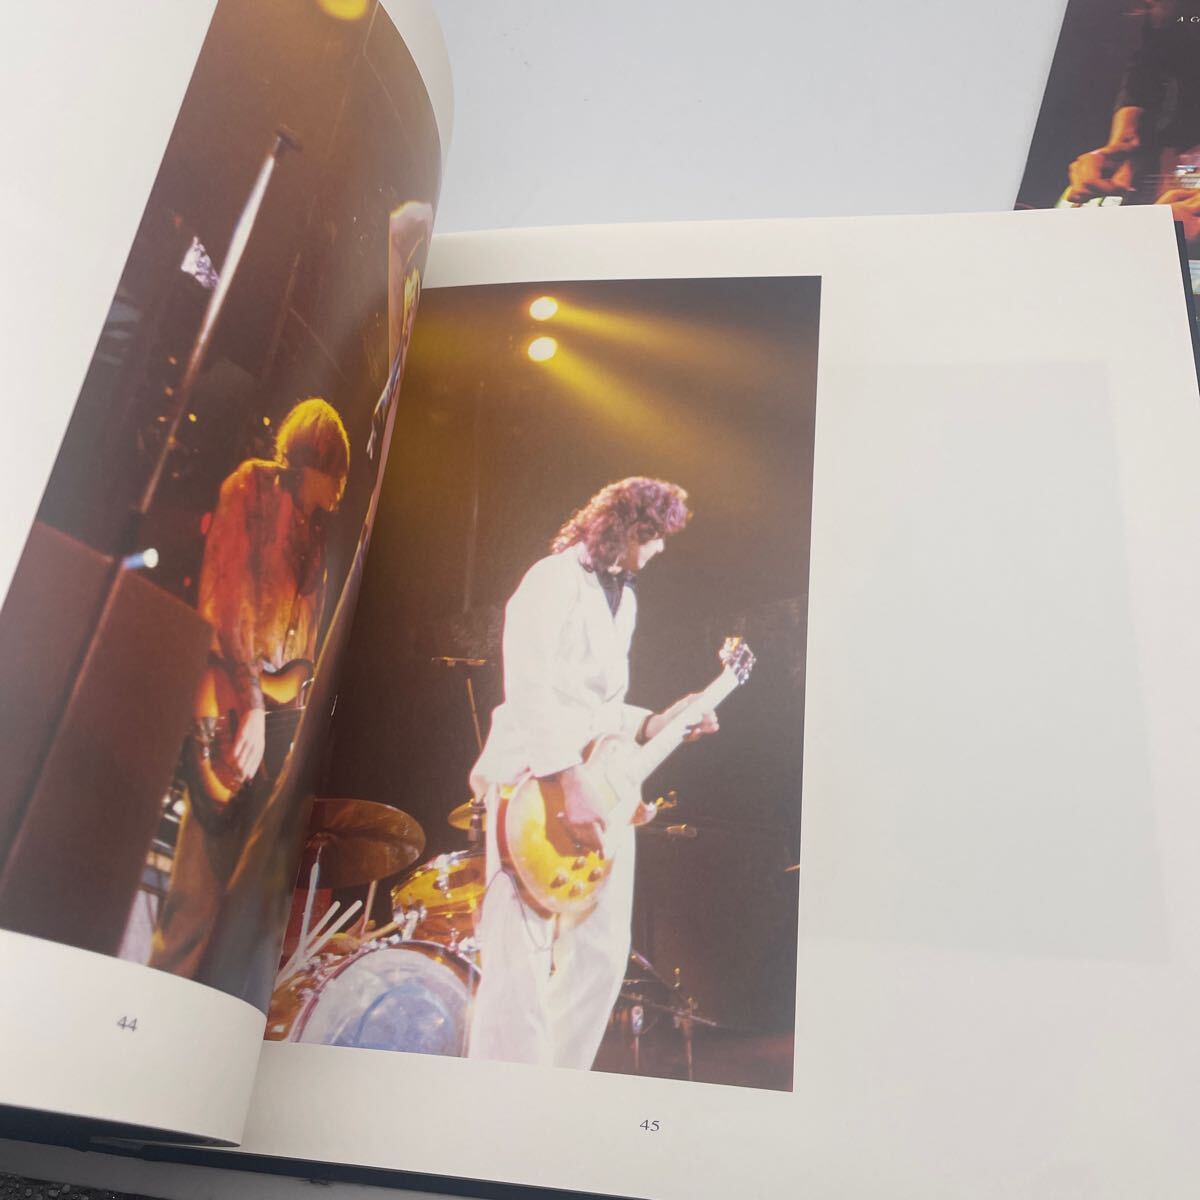  red *tsepe Lynn /Led Zeppelin Live Dreams/The Outtakes/Limited Collector Edition/ photoalbum 